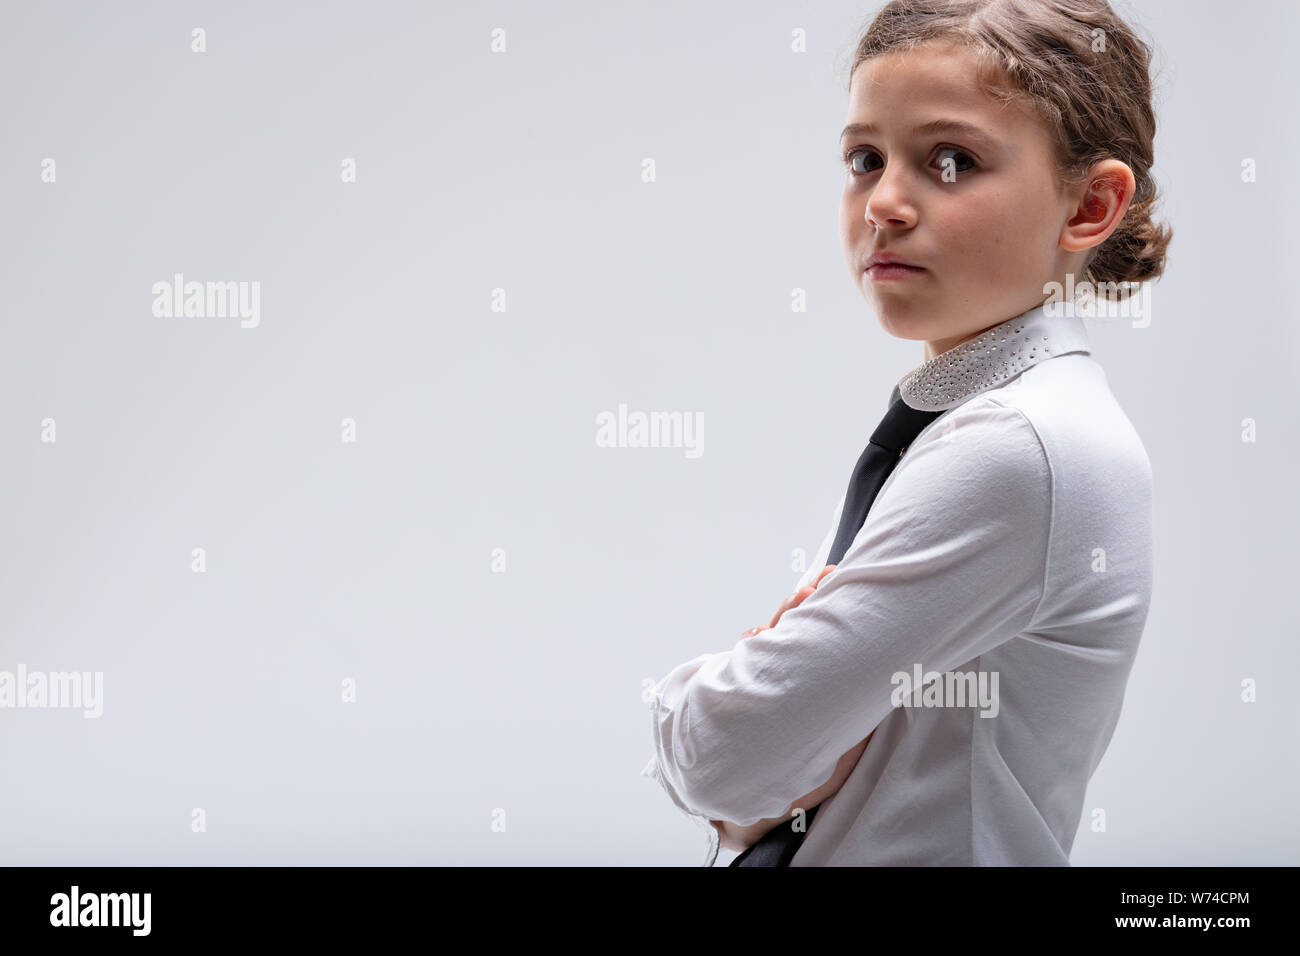 Serious young schoolgirl in uniform turning her head and looking intently at the camera with folded arms over a white background with copy space Stock Photo